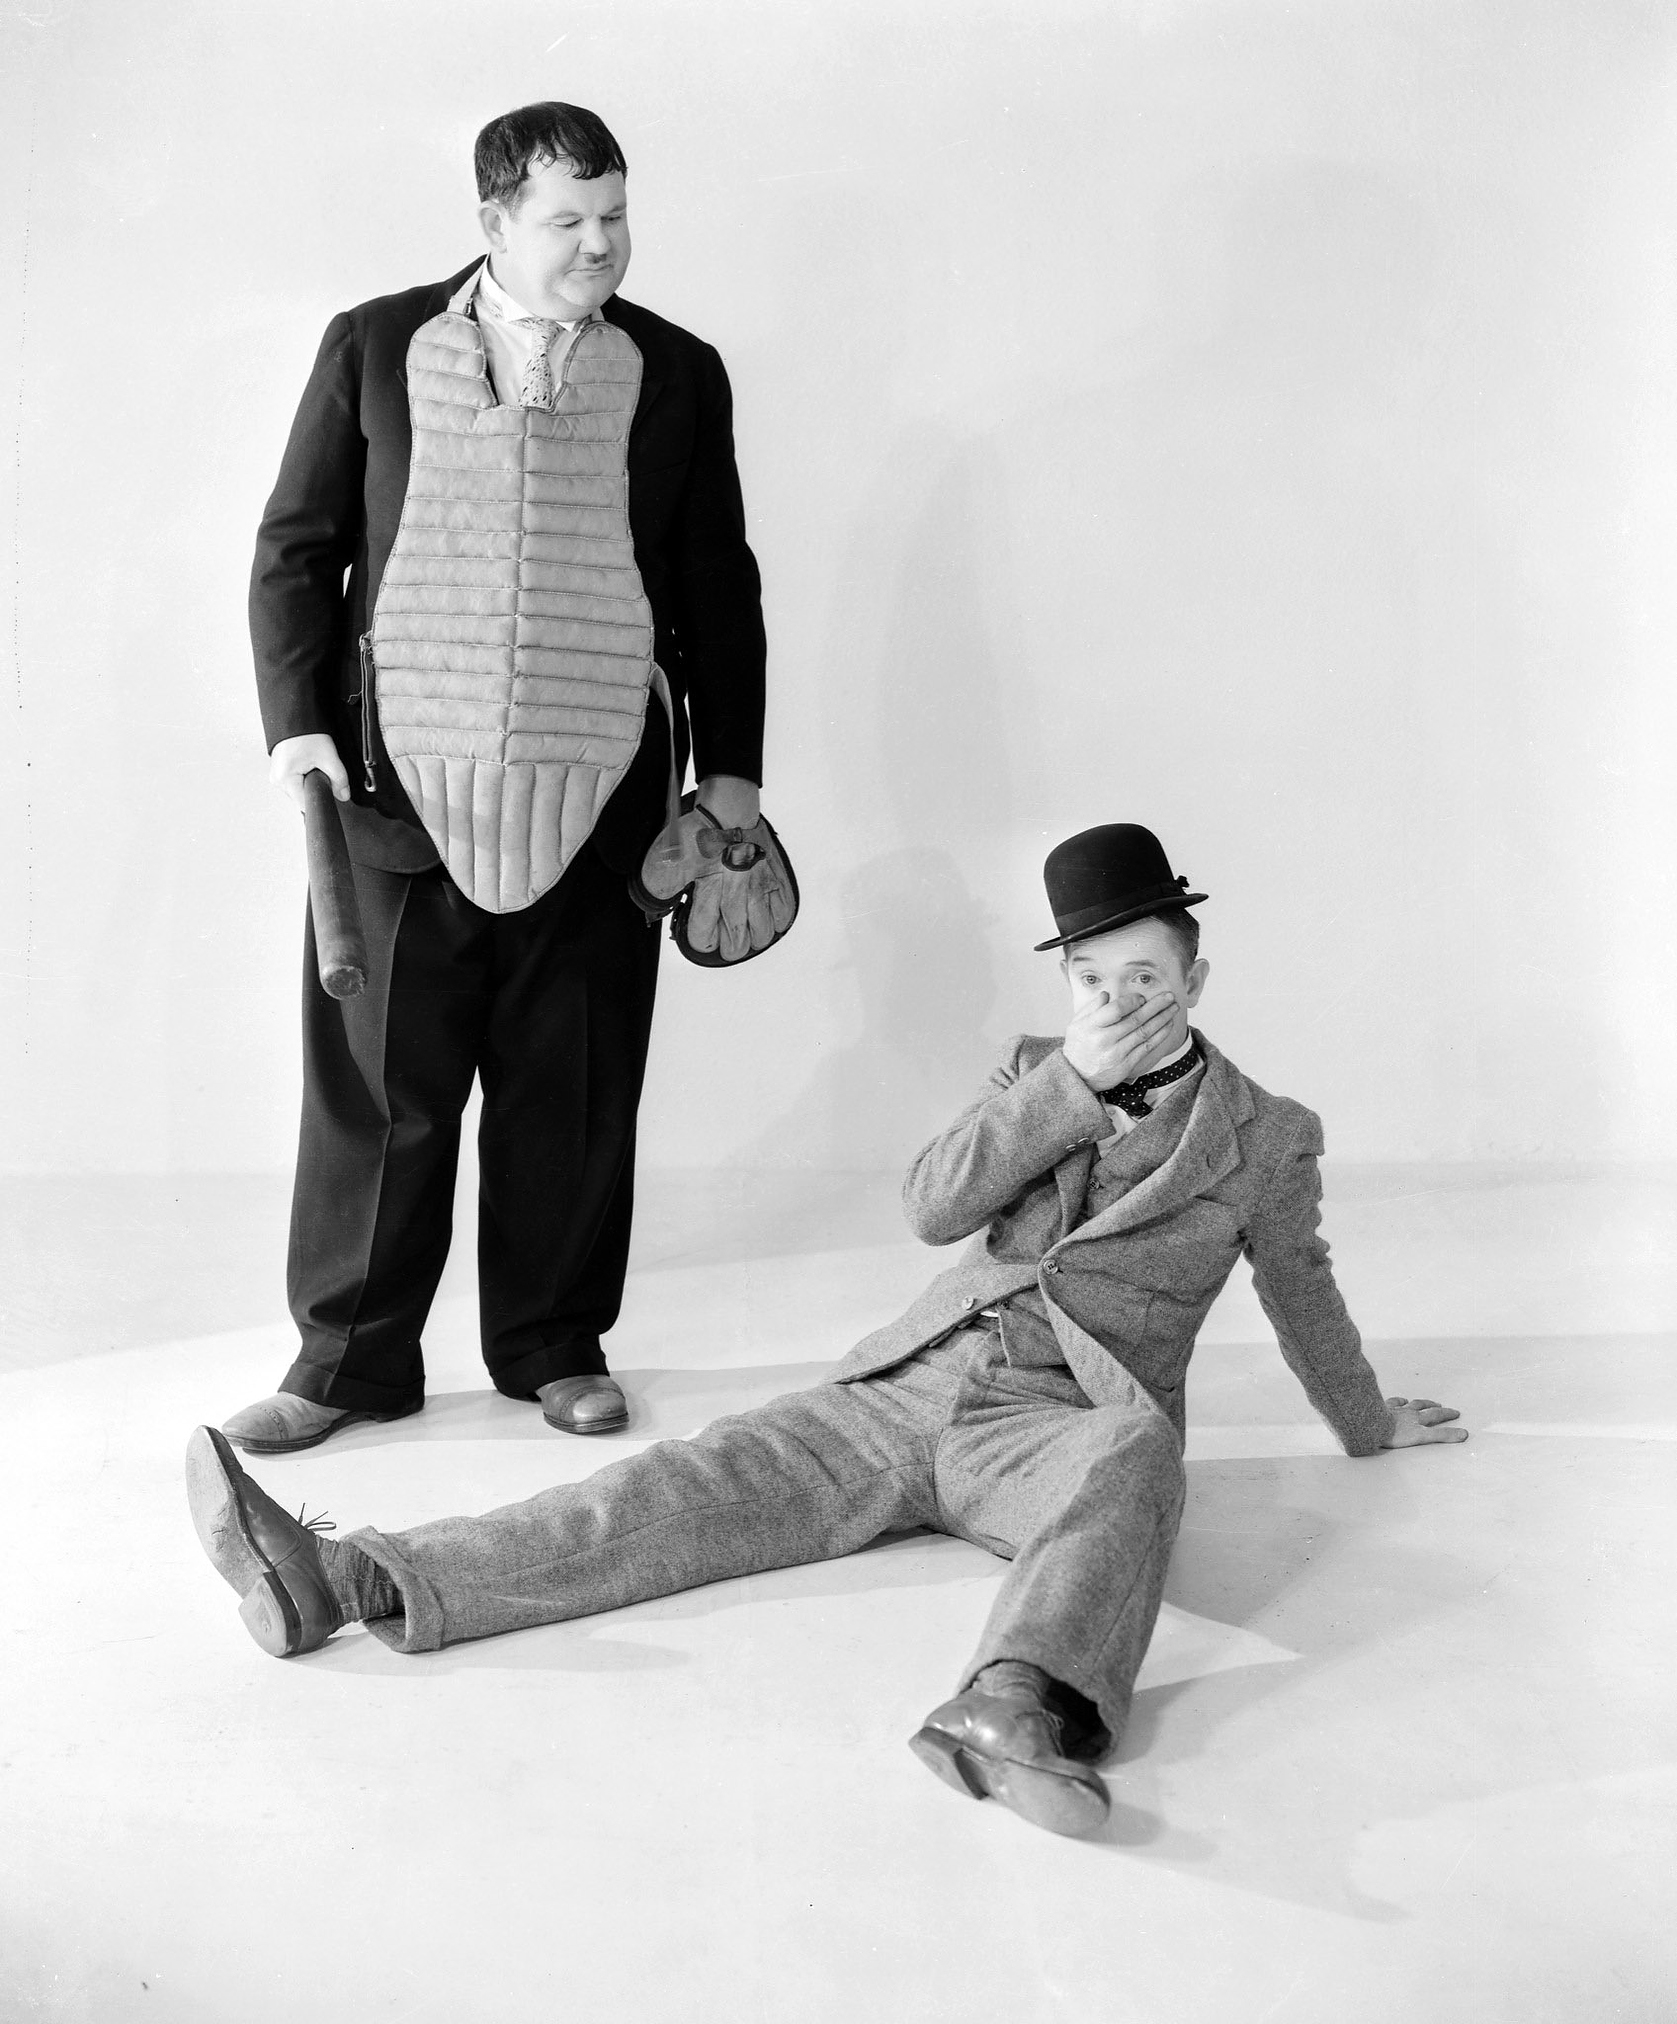 Stan Laurel holds his nose in pain after a sporting altercation with Oliver Hardy.